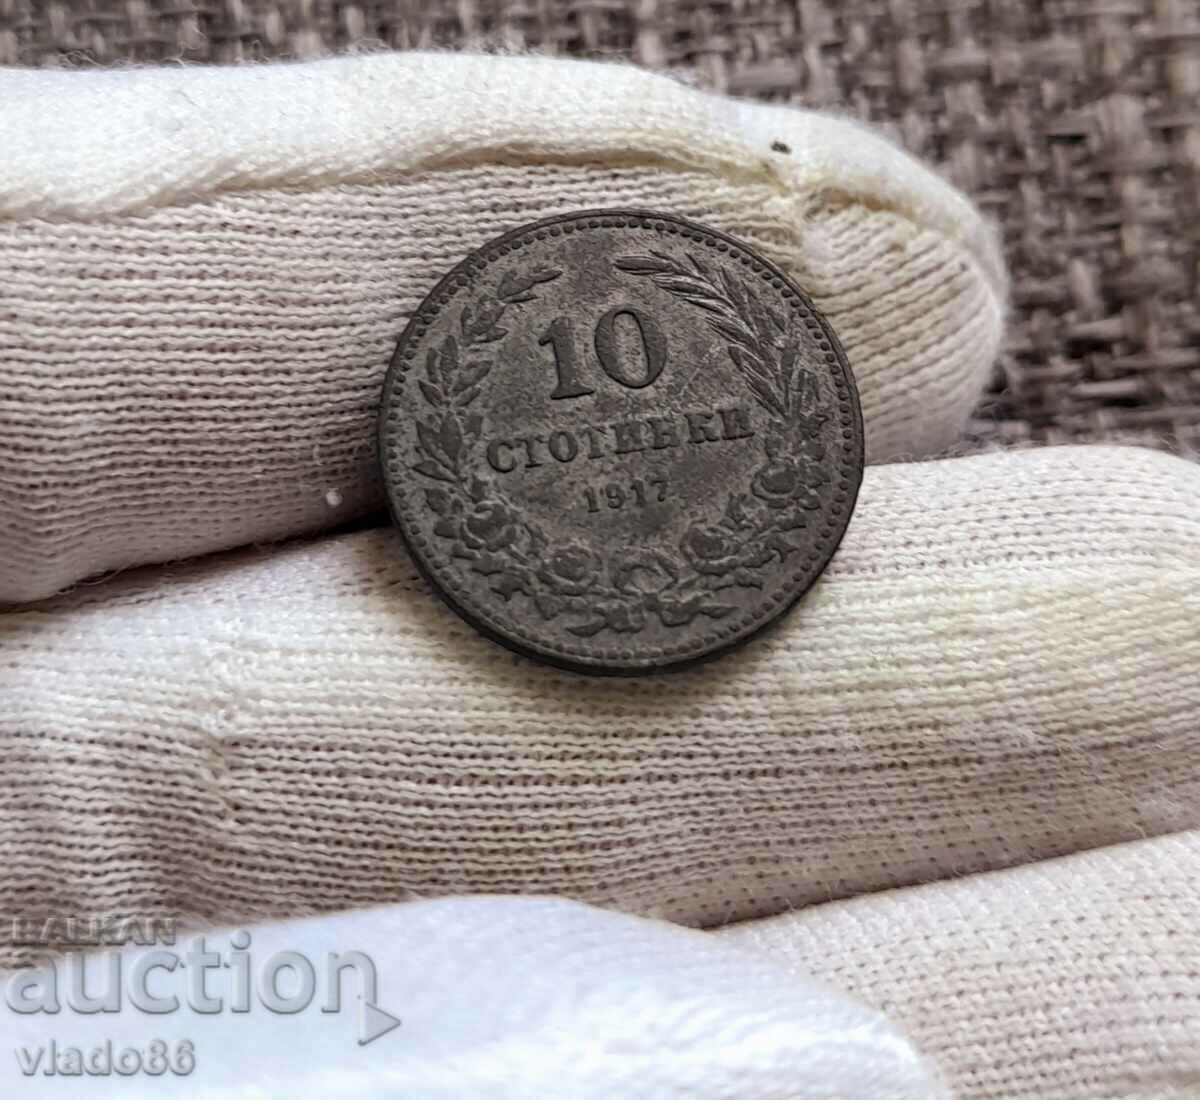 10 cents 1917